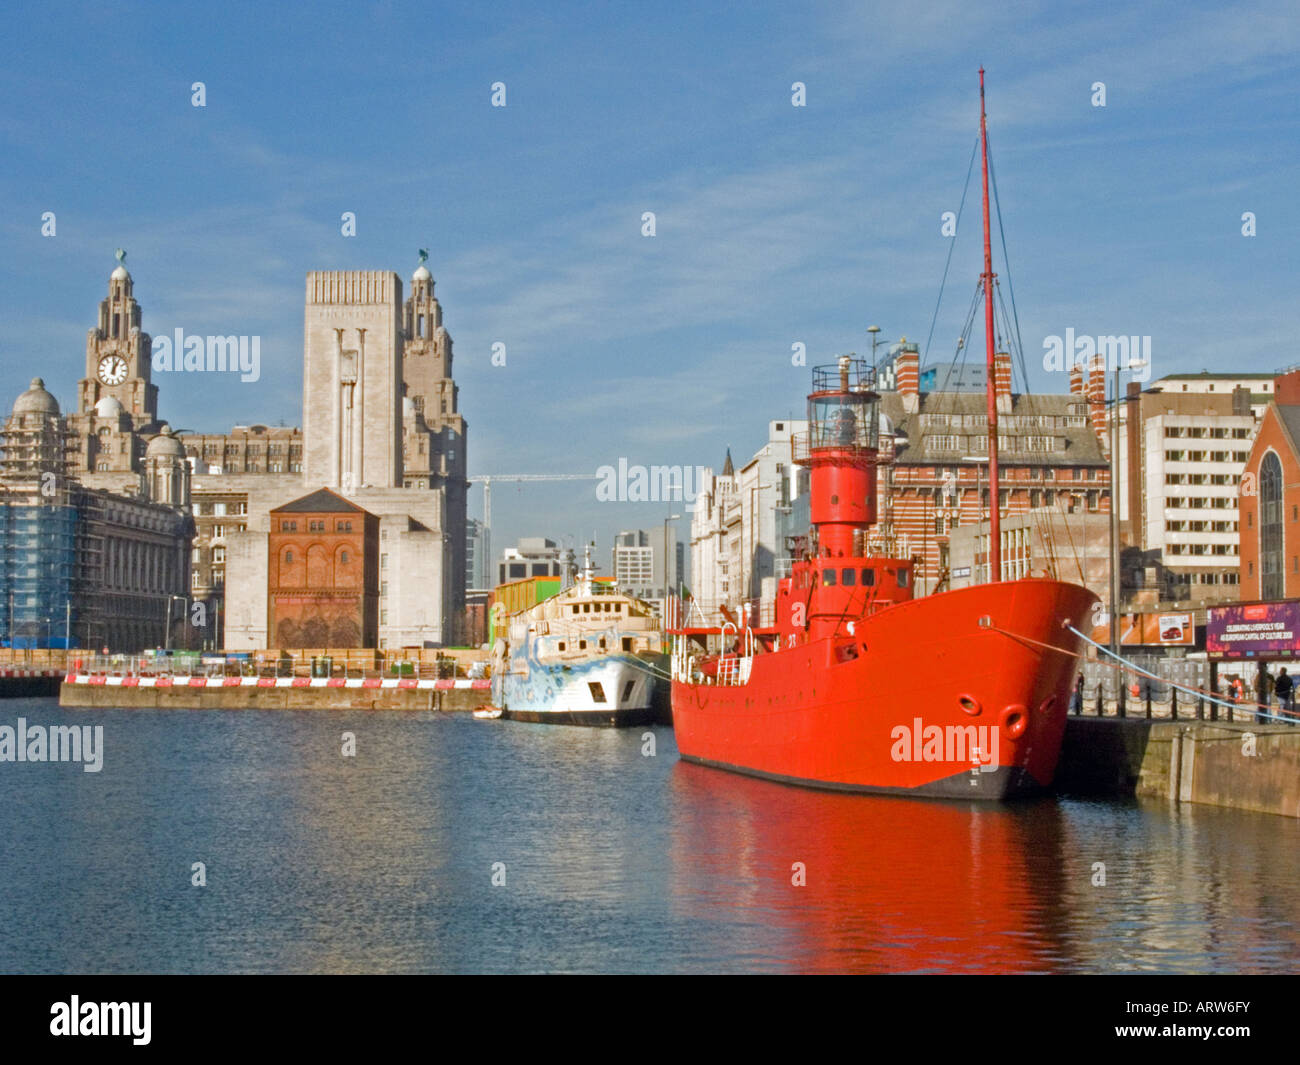 Ships on Canning Dock, Liverpool Stock Photo